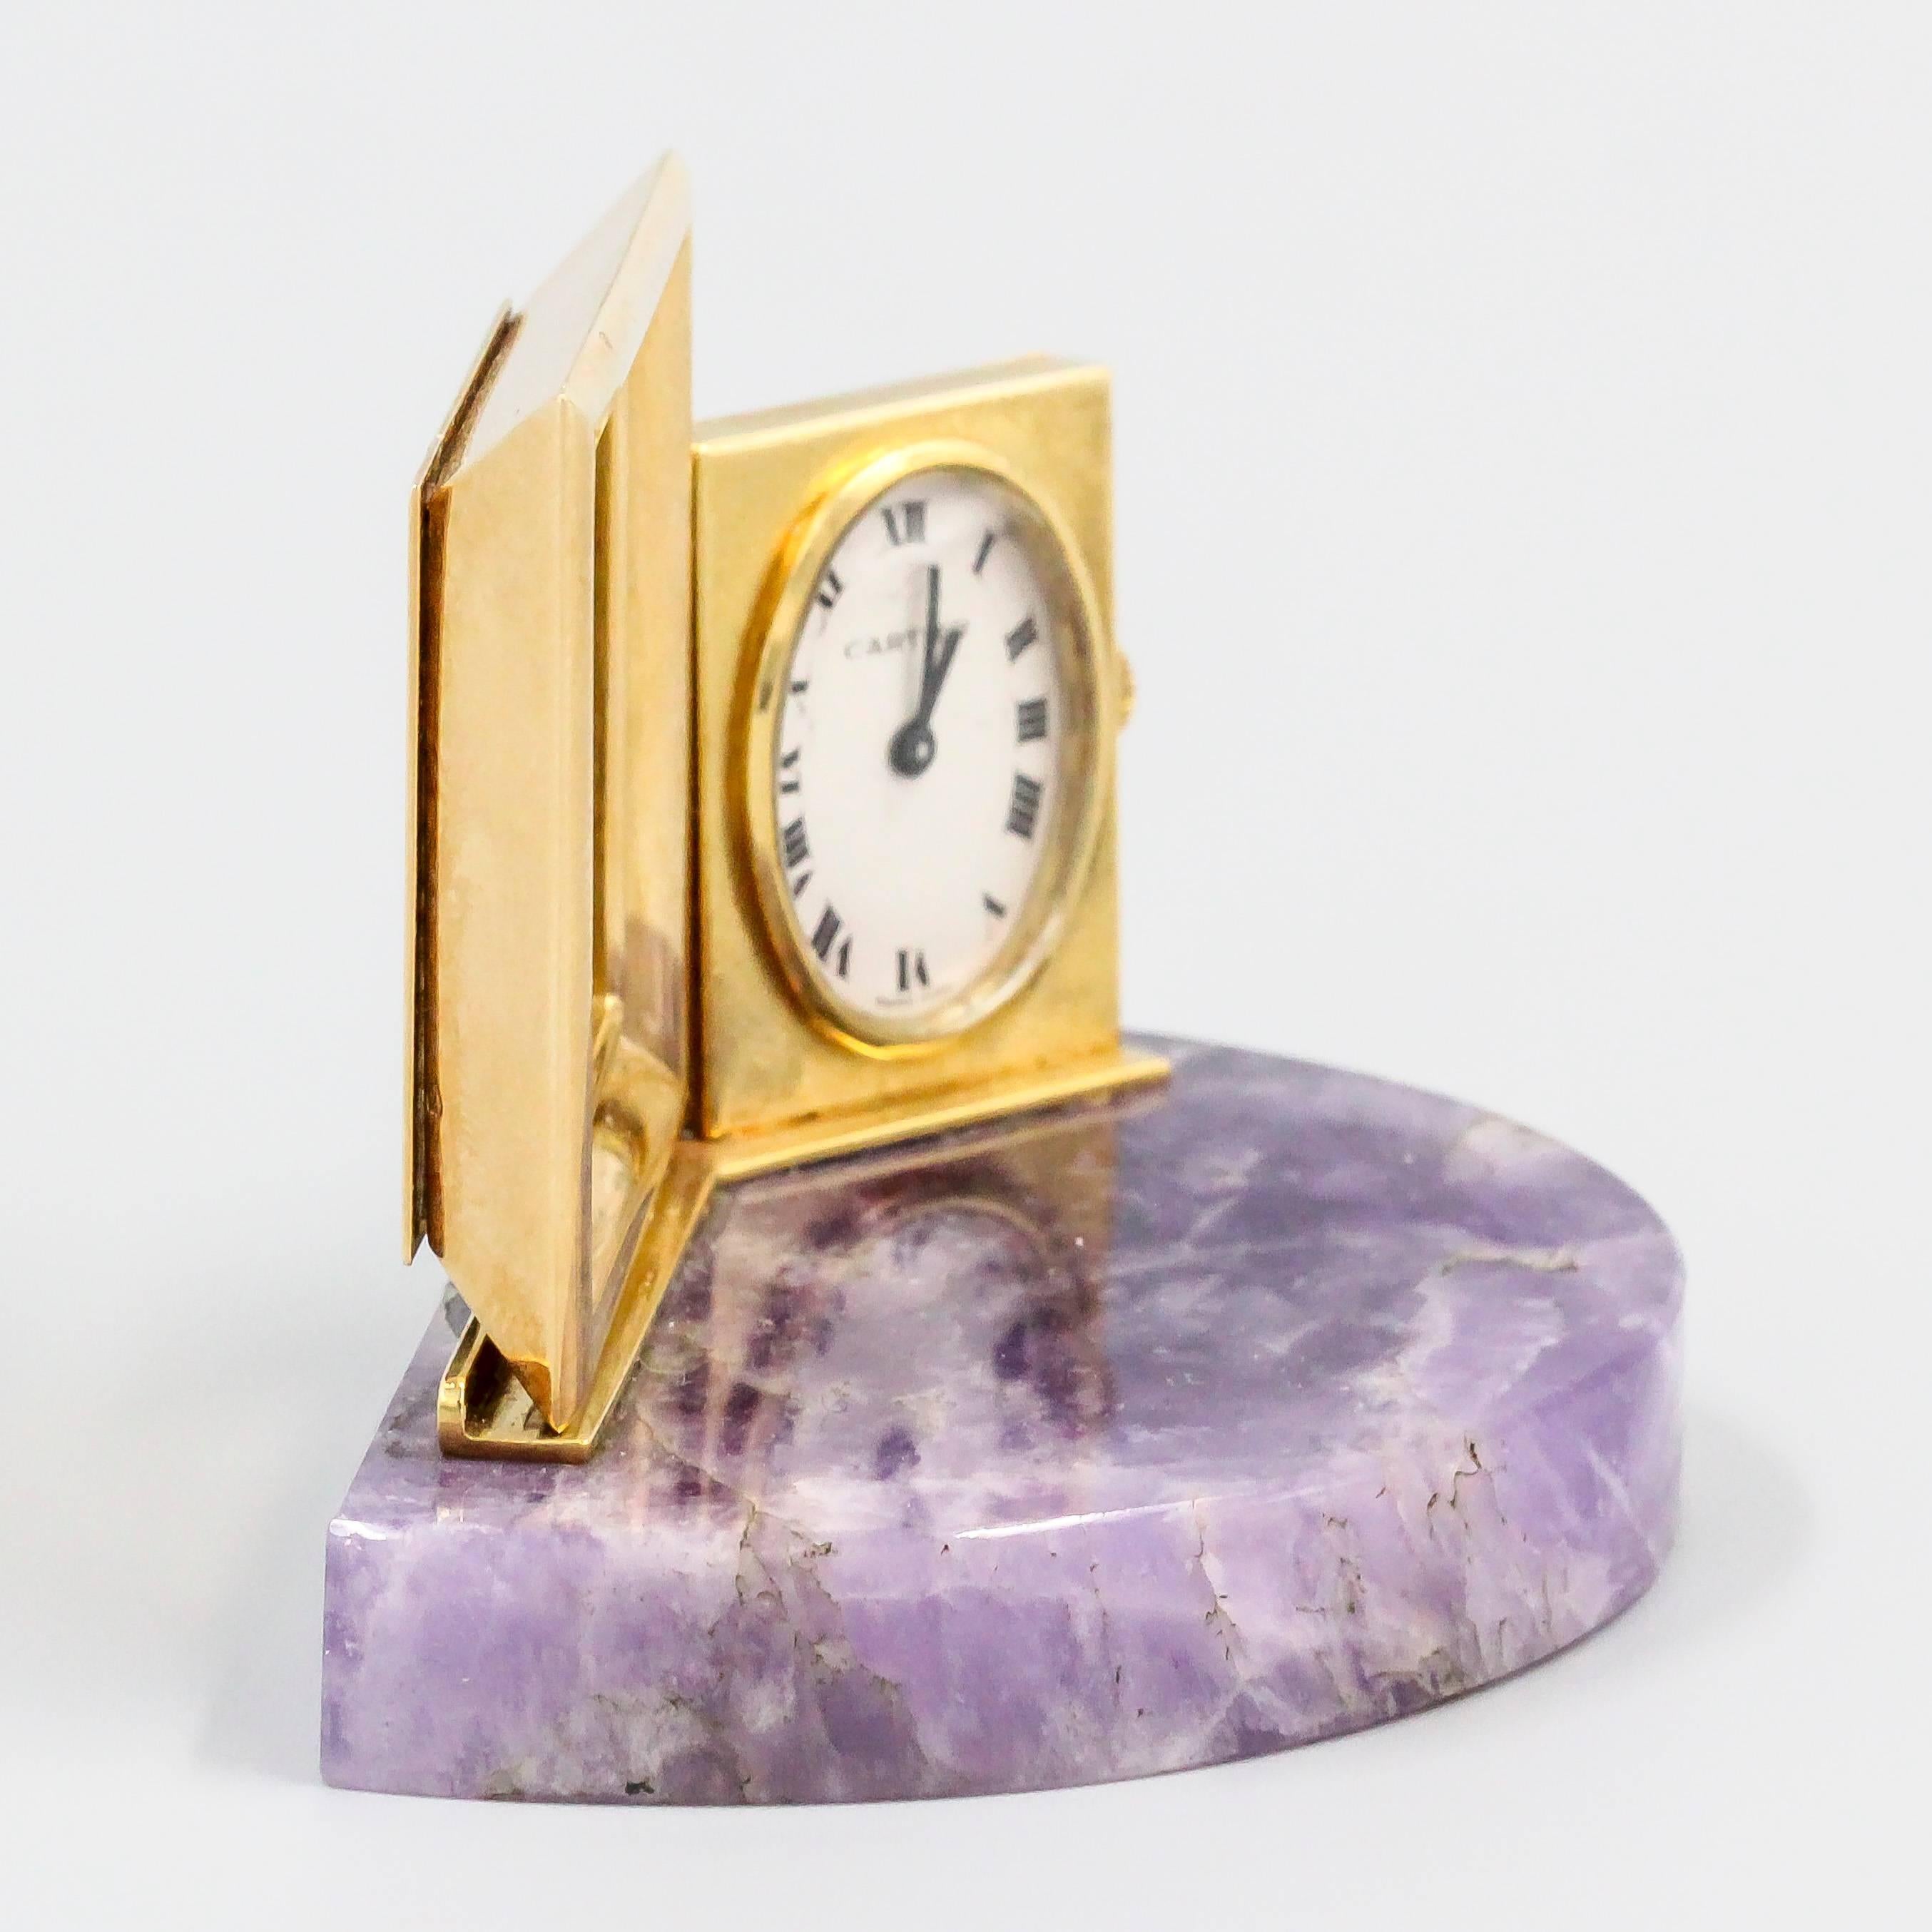 Rare and unusual 18K yellow gold and amethyst clock with attached picture frame by Cartier, circa 1960s. It features an amethyst base, with picture frame able to hold a 1